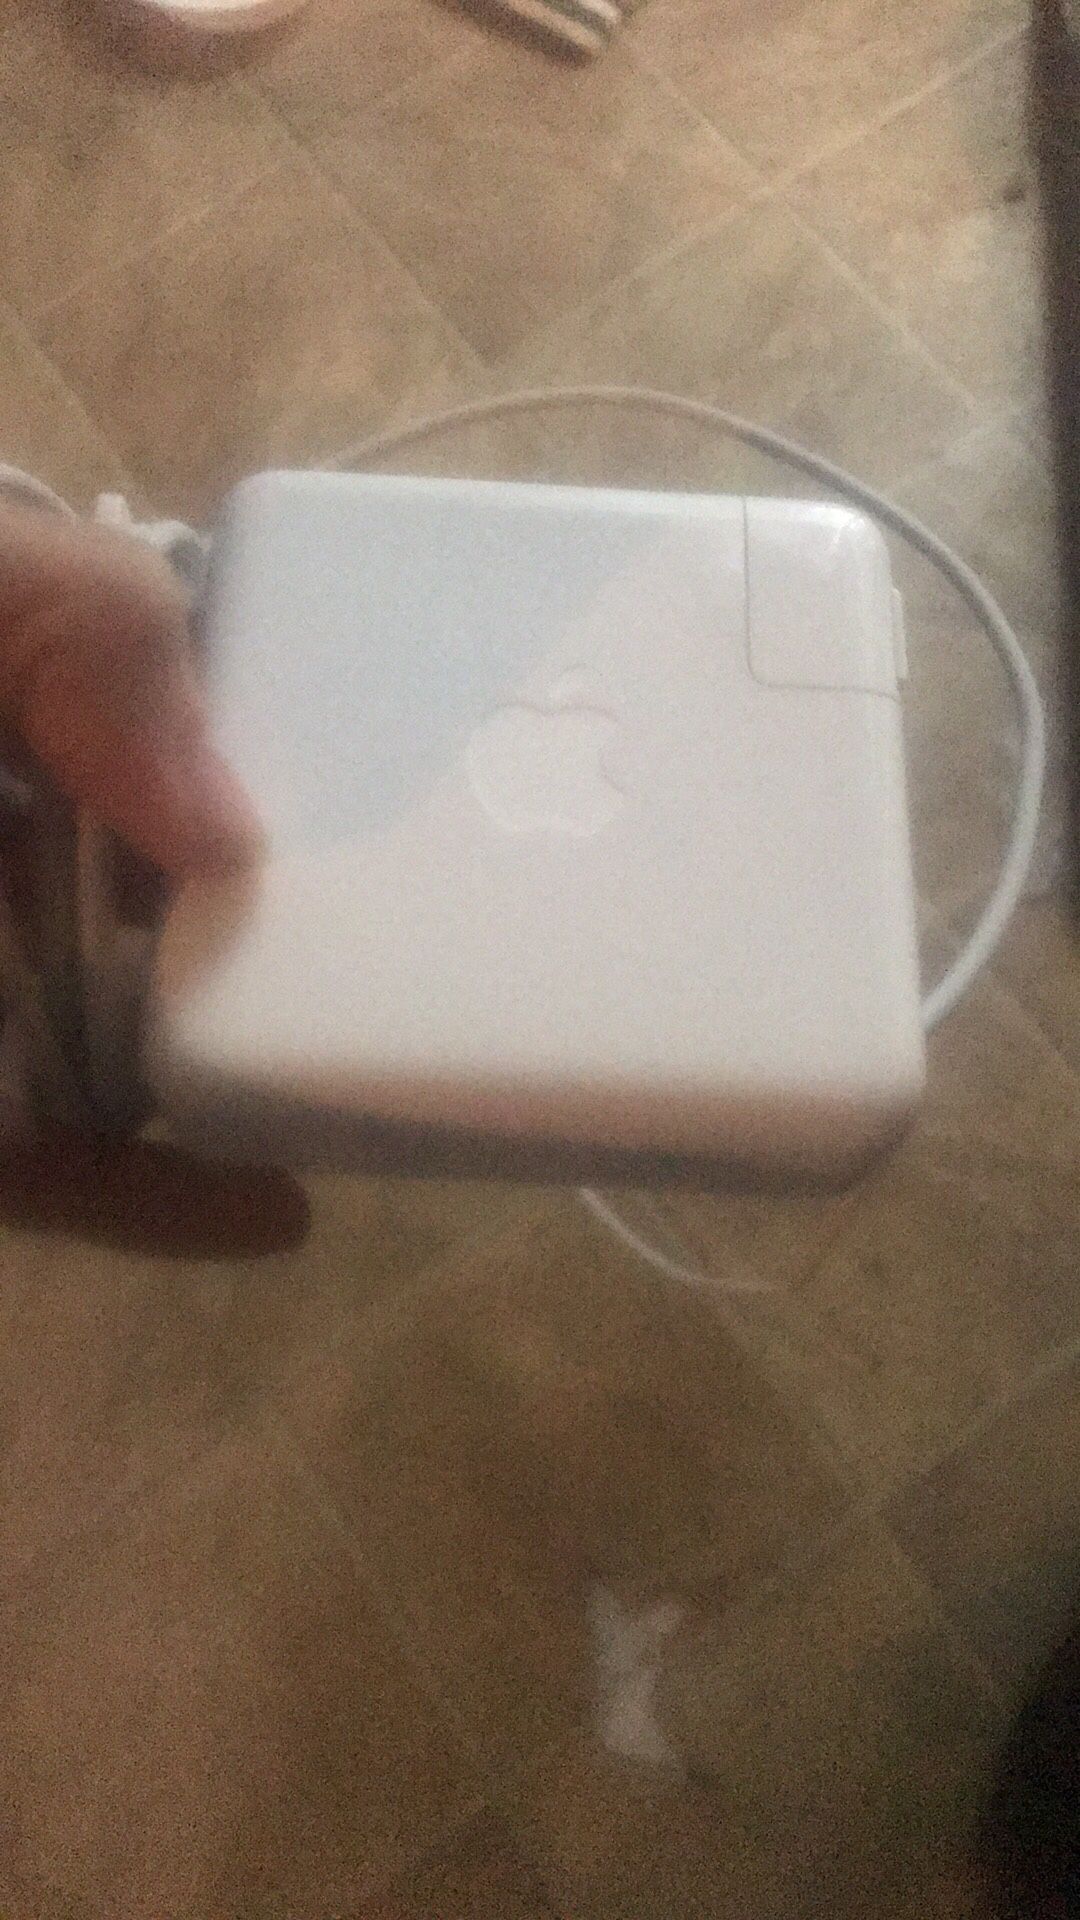 Mac Charger